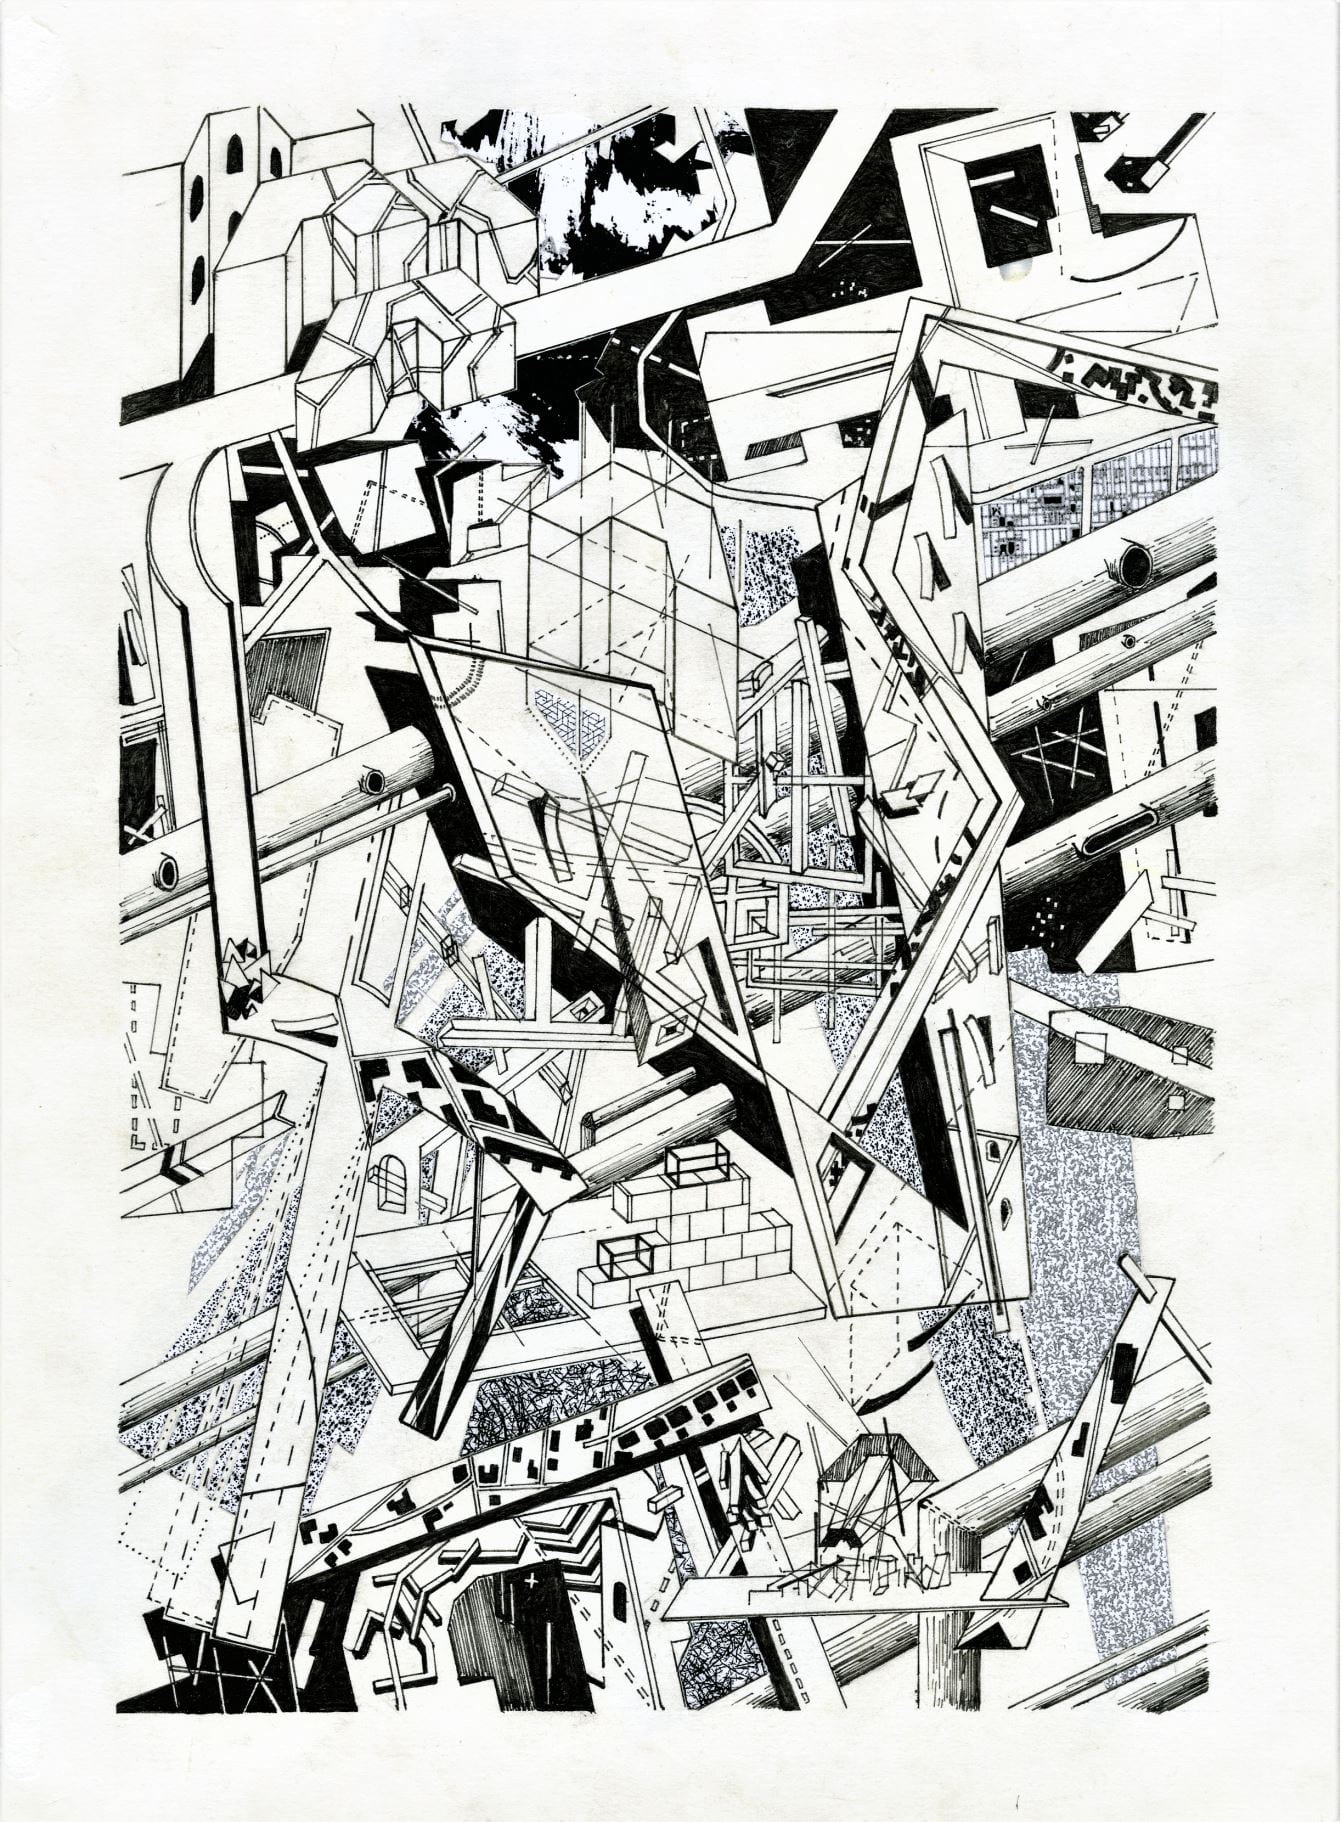 A black and white illustration, with maps, buildings and pipes, all colliding into each other.